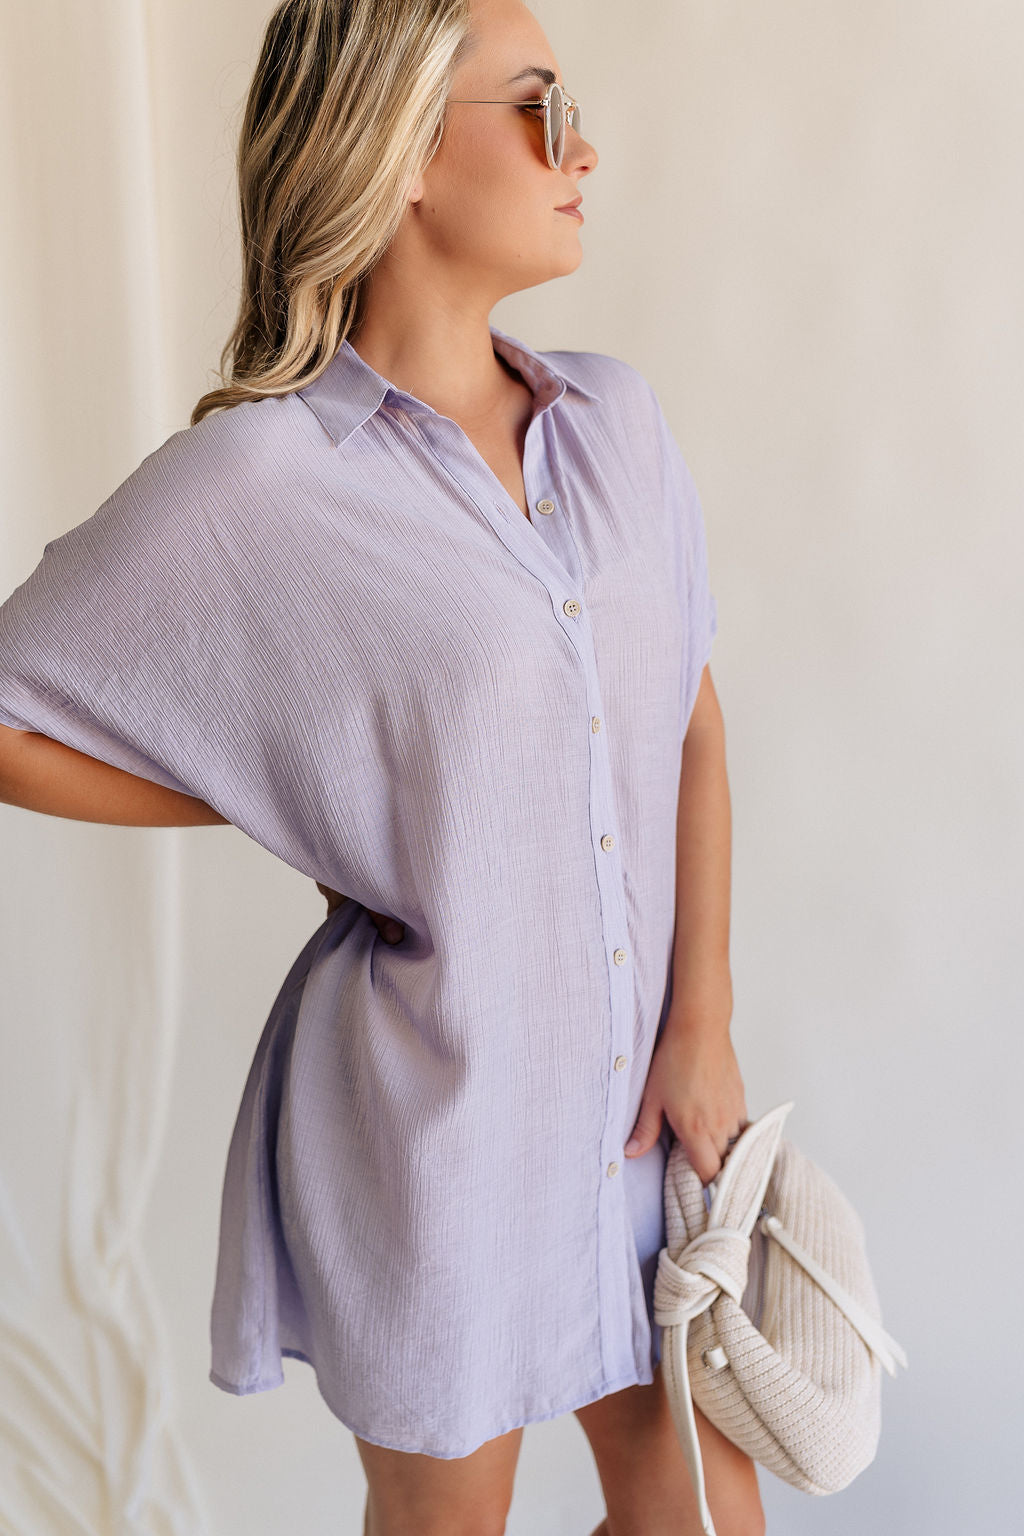 Side view of female model wearing the Luna Lavender Button-Up Short Sleeve Mini Dress which features Lavender Lightweight Fabric, Button-Up Front Closure, Collared Neckline and Short Sleeves